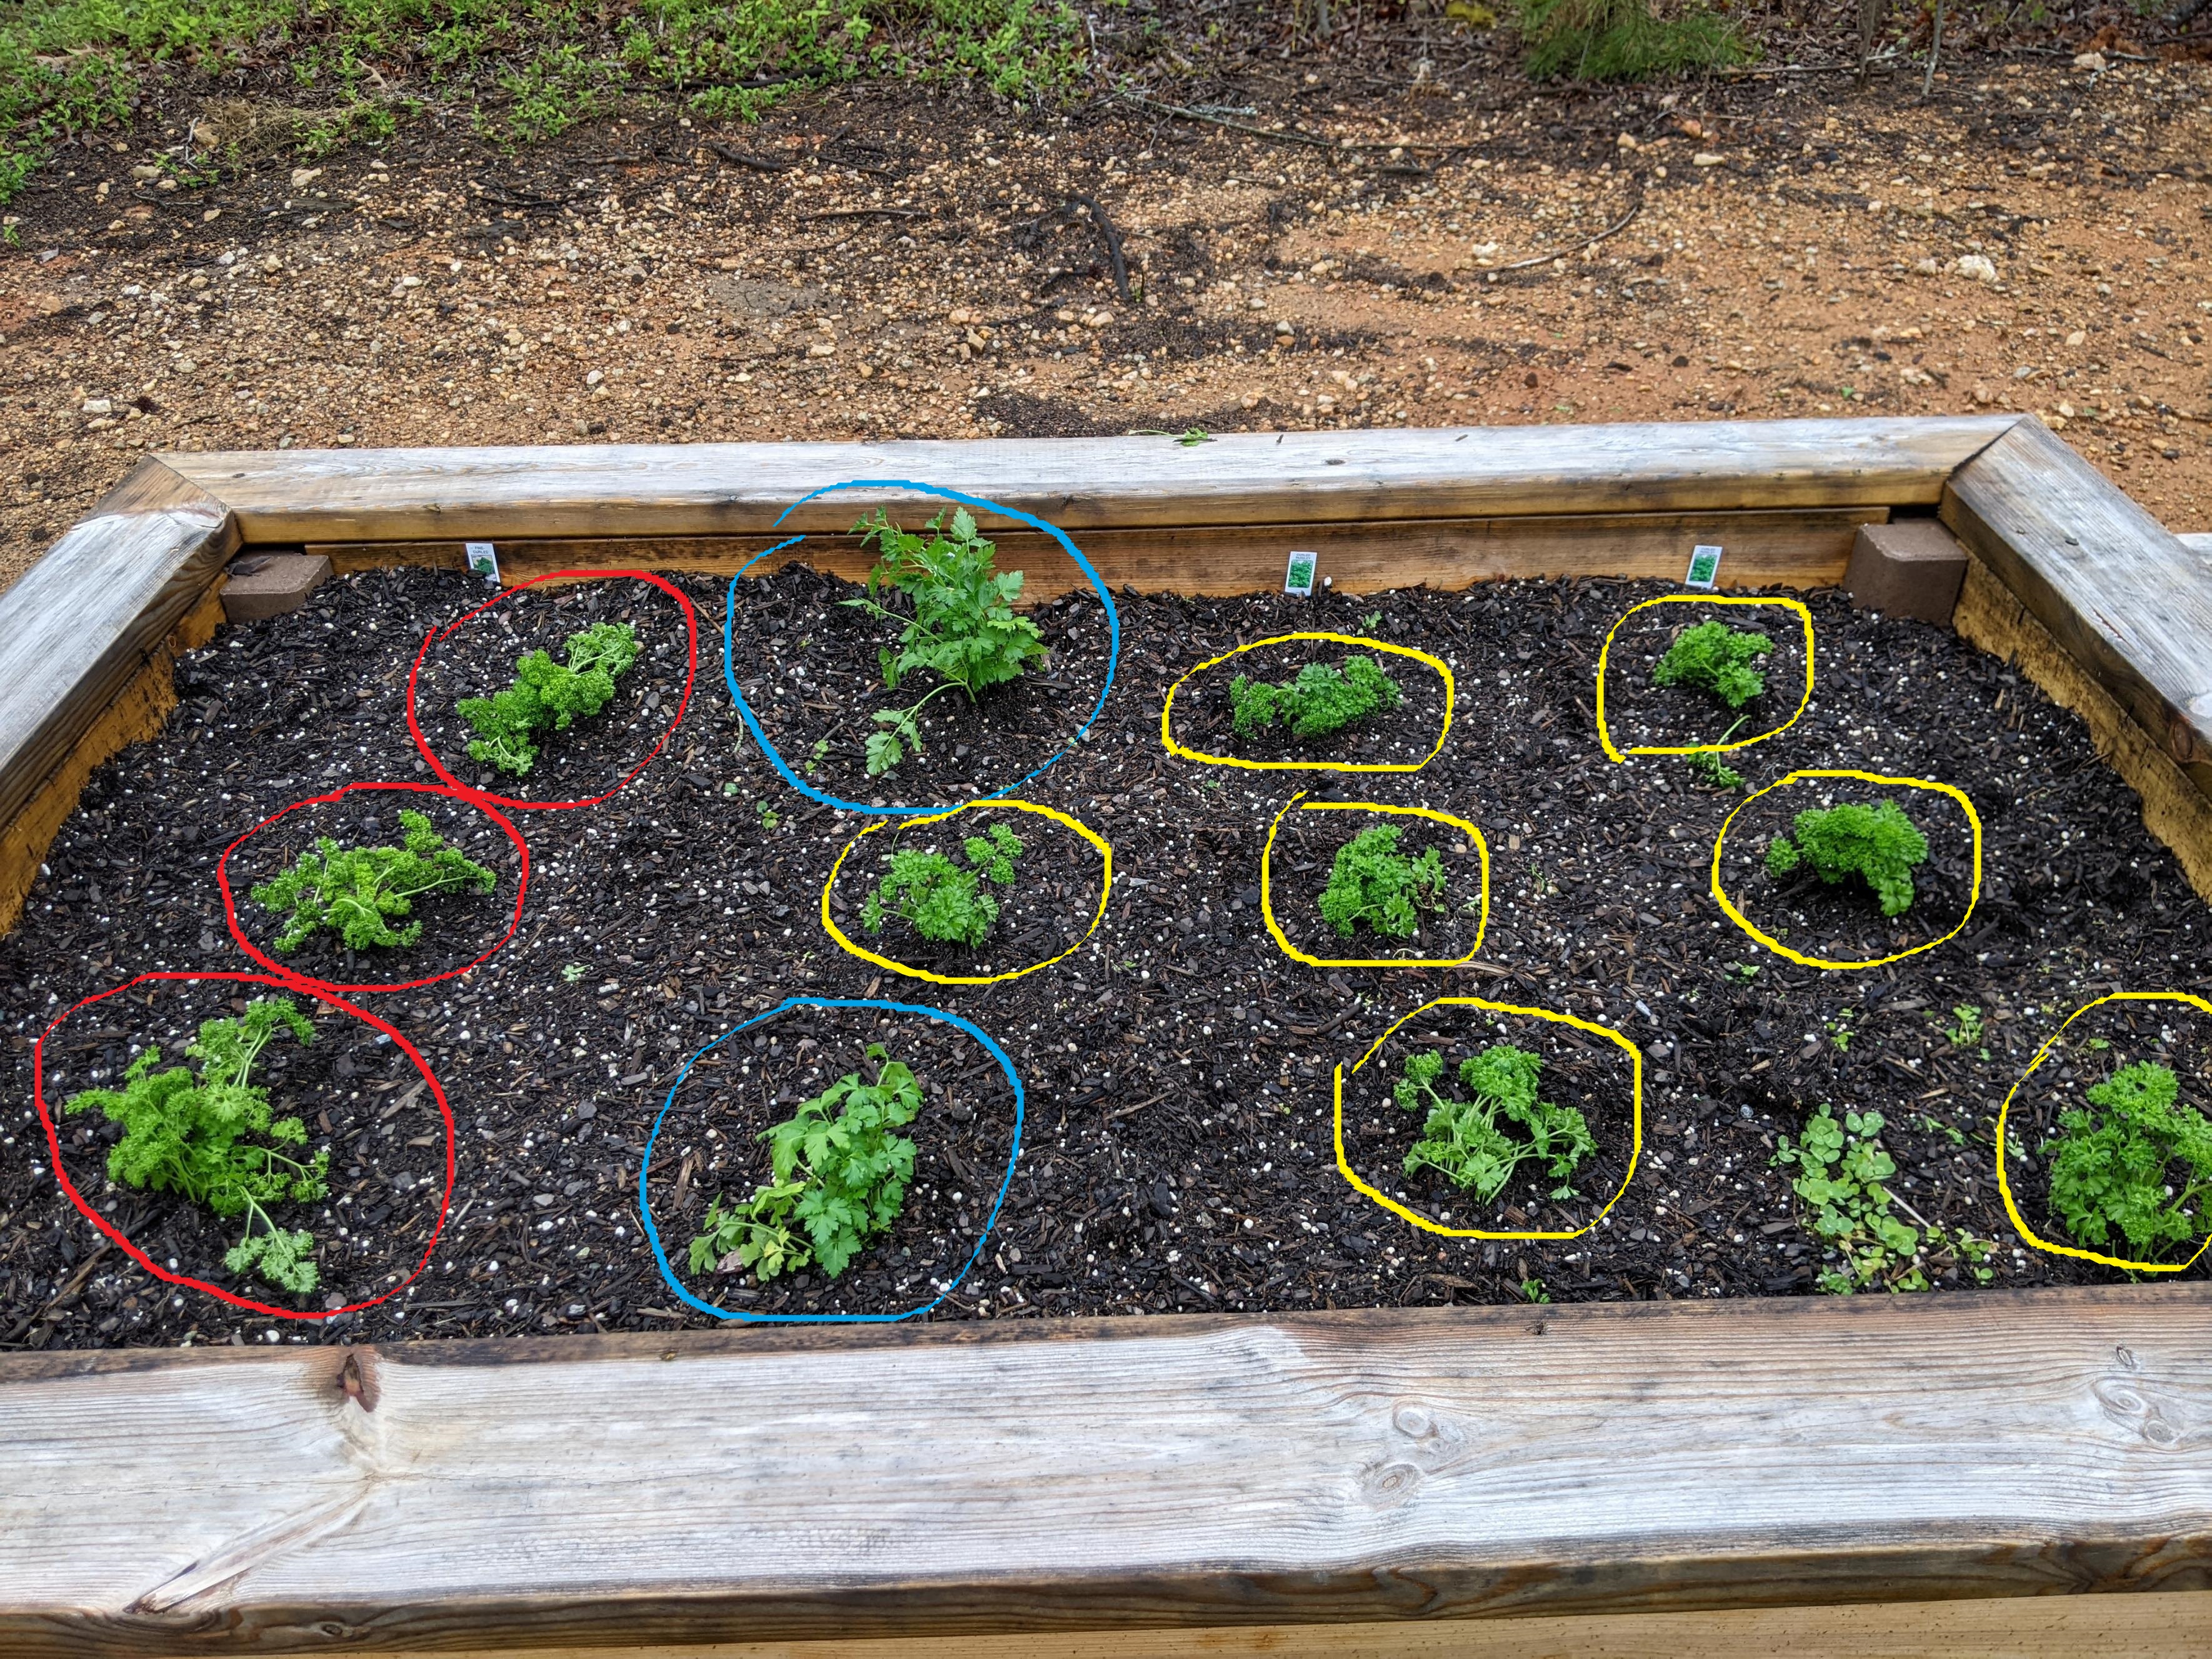 Middle section of raised garden bed, planted with various varieties of parsley